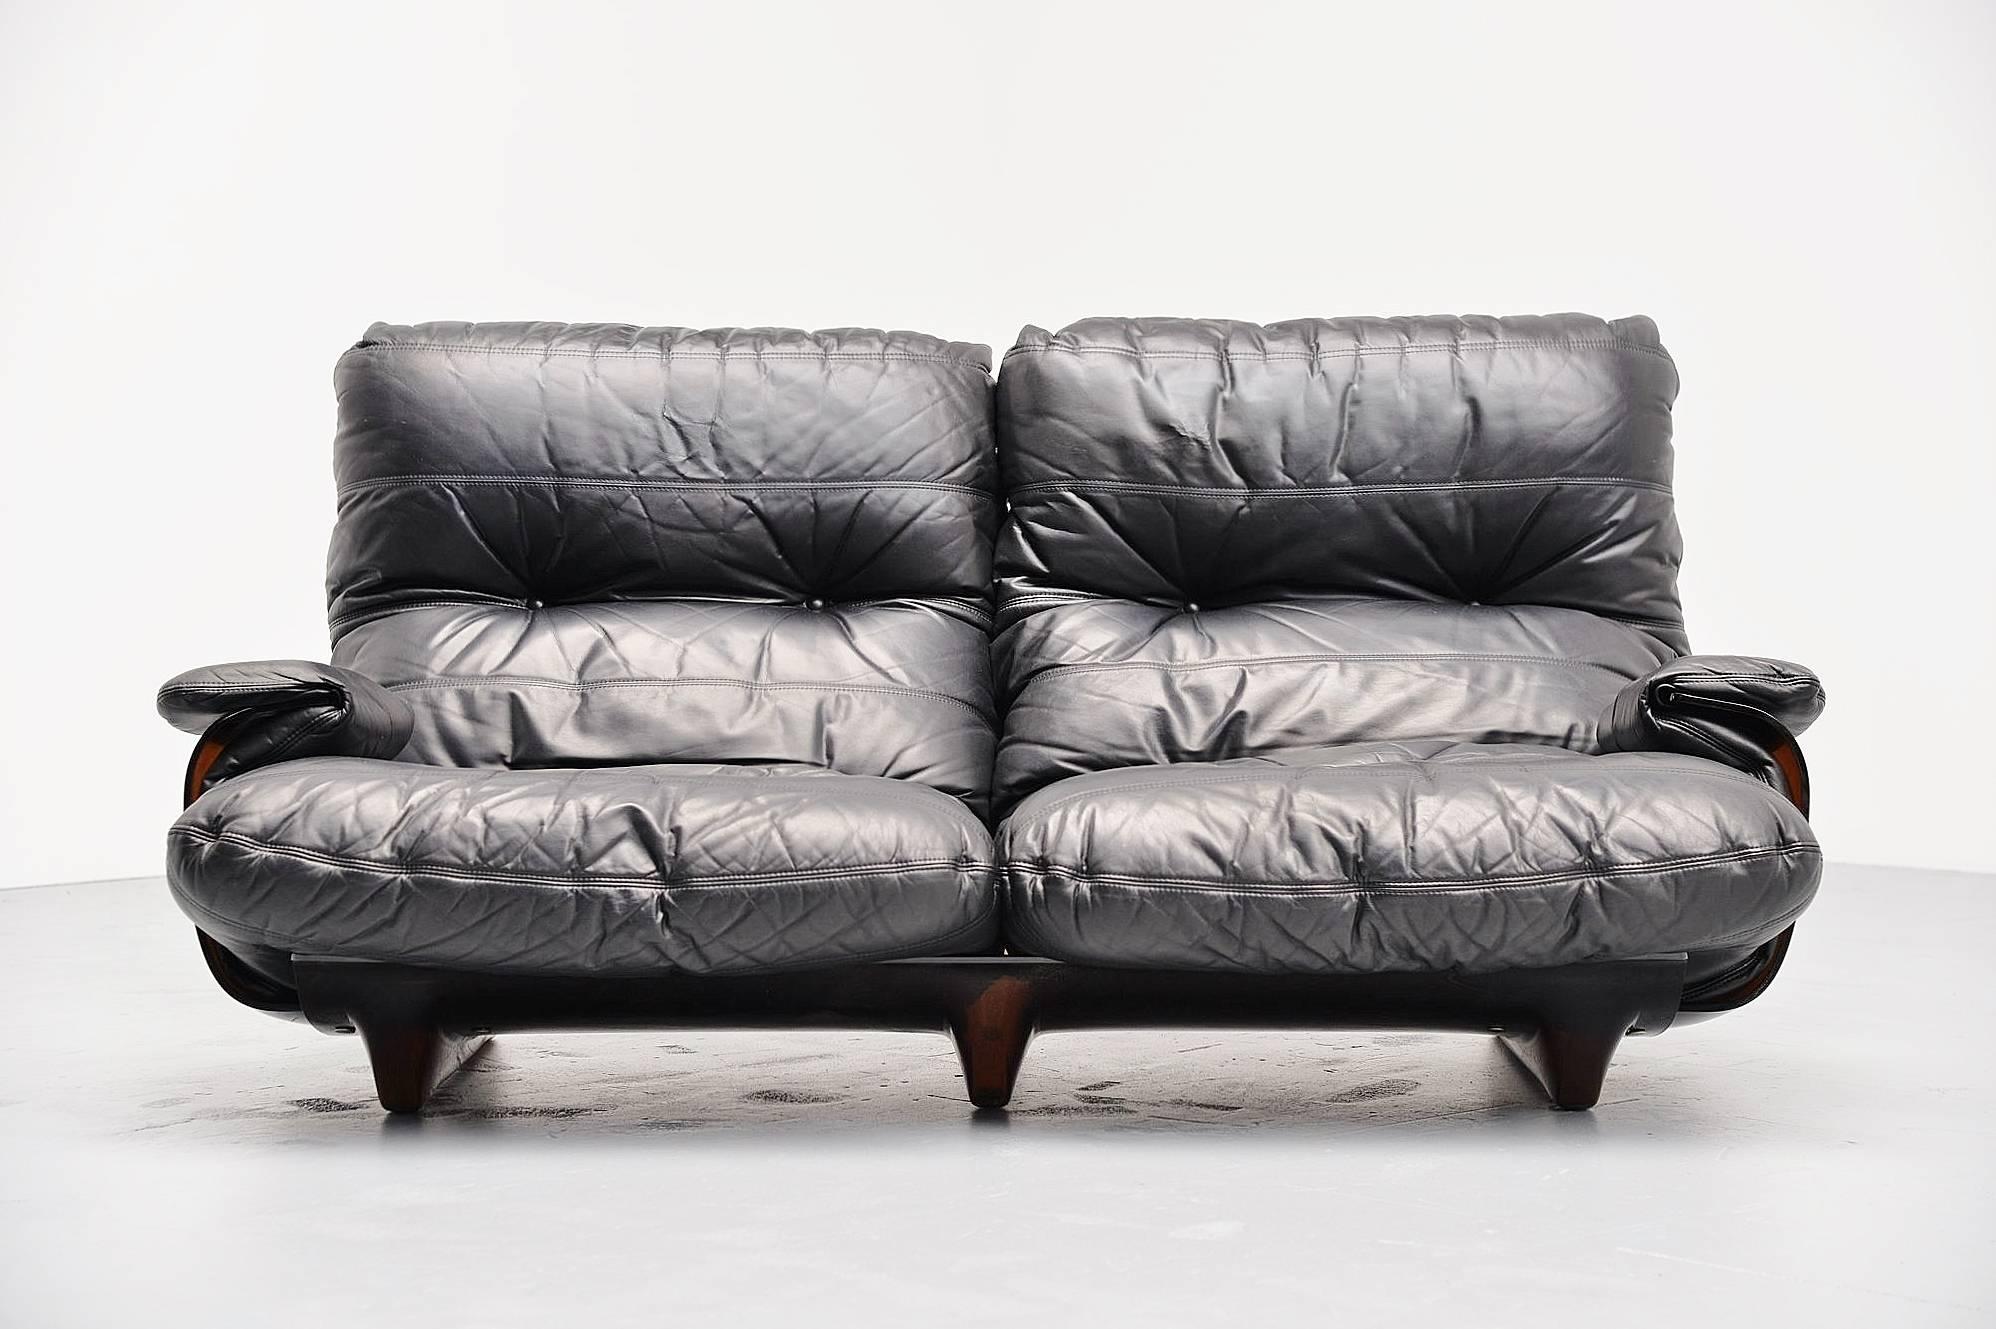 Large lounge sofa designed by Michel Ducaroy, manufactured by Ligne Roset, France 1970. This is from the Marsala series and this has a brown plexiglass base and very cosy black leather cushions. Super comfortable lounge sofa in high quality leather.